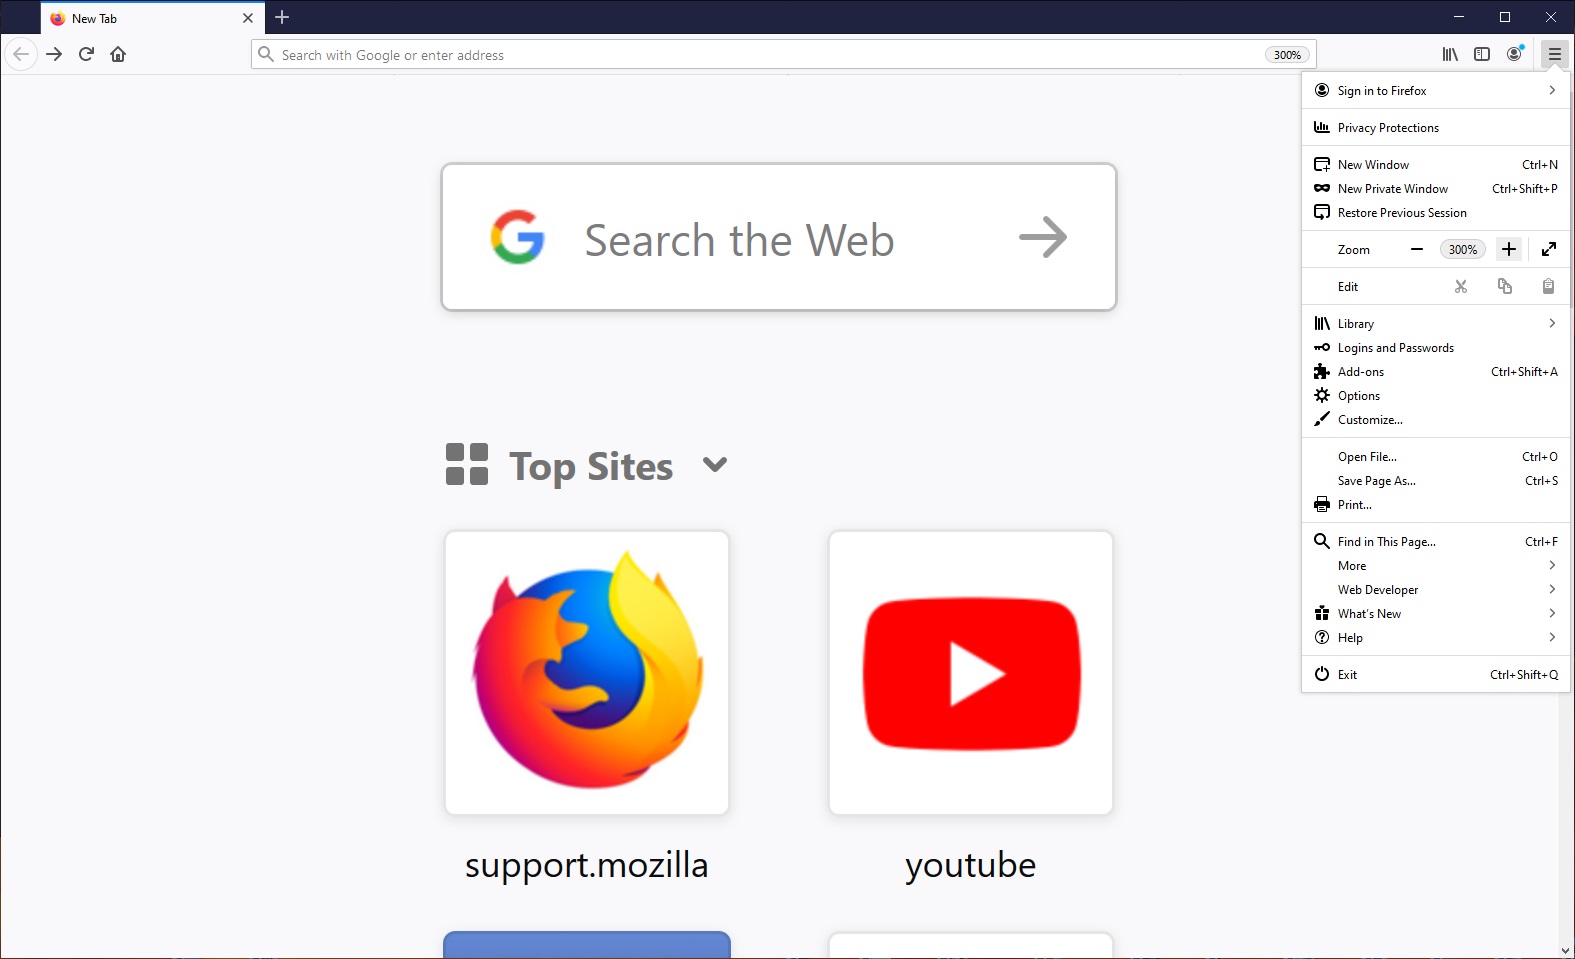 firefox for linux on mac